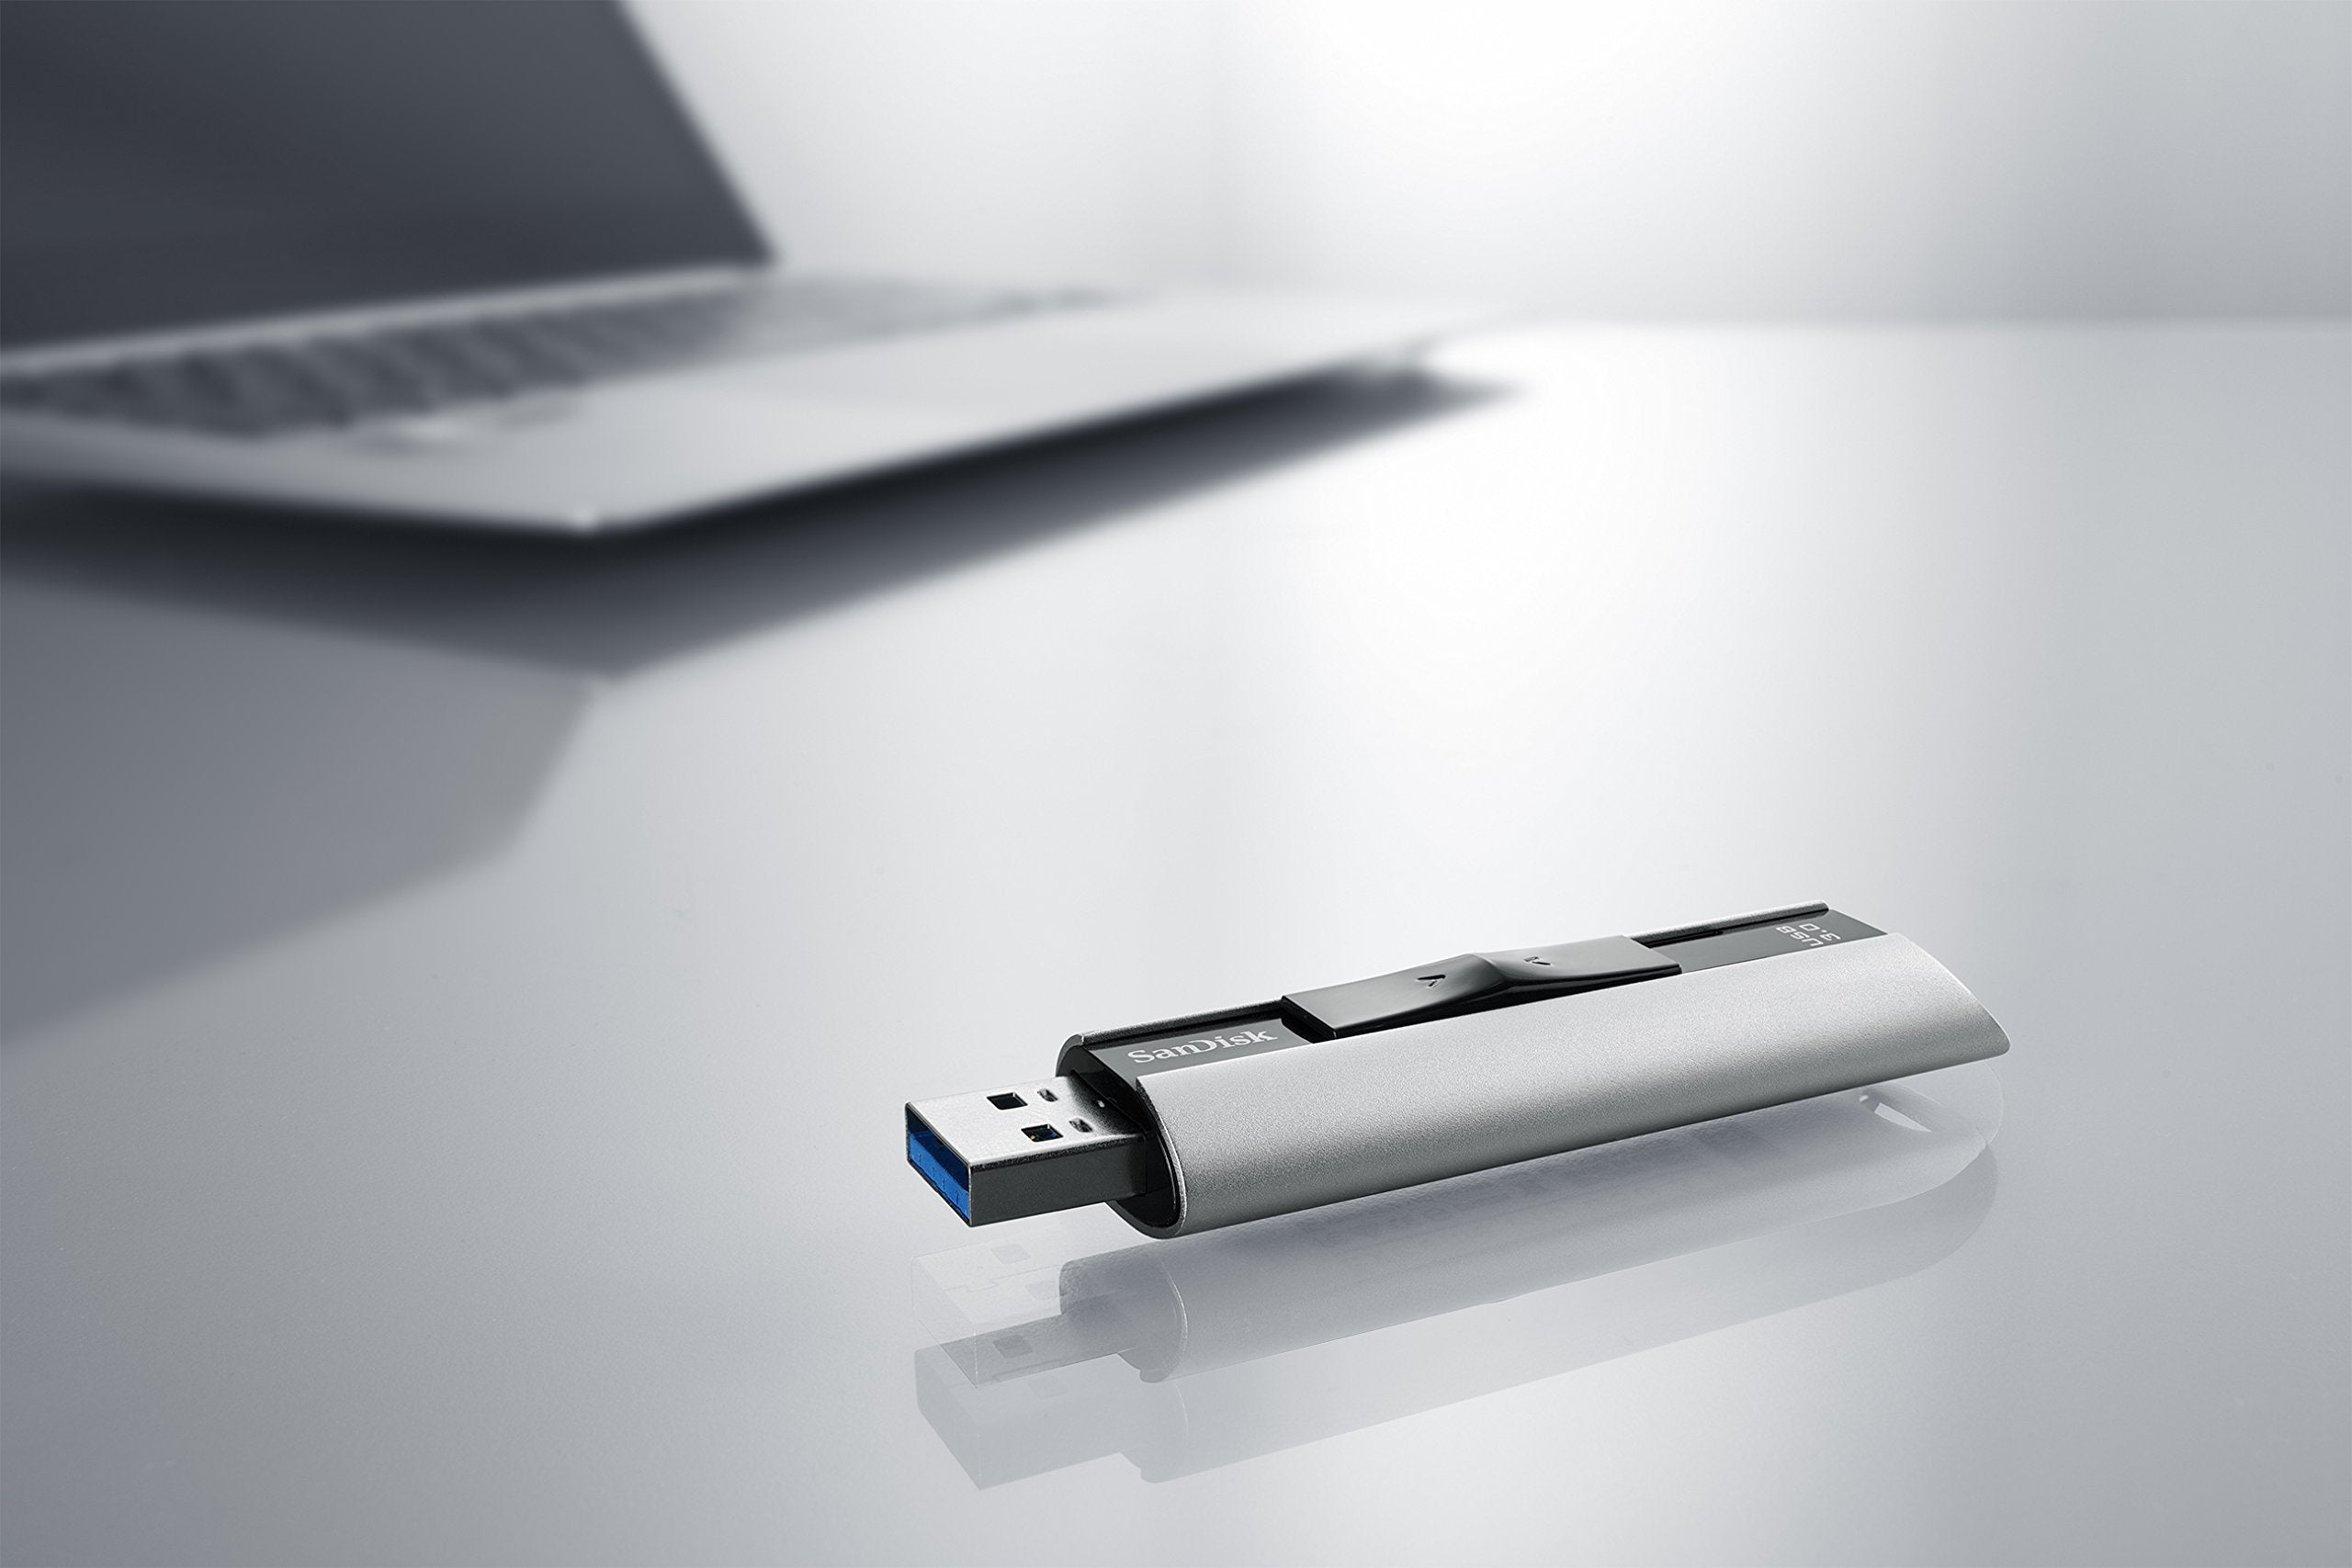 SanDisk Extreme PRO CZ88 128GB USB 3.0 Flash Drive Speeds Up To 260MB/s- SDCZ88-128G-G46